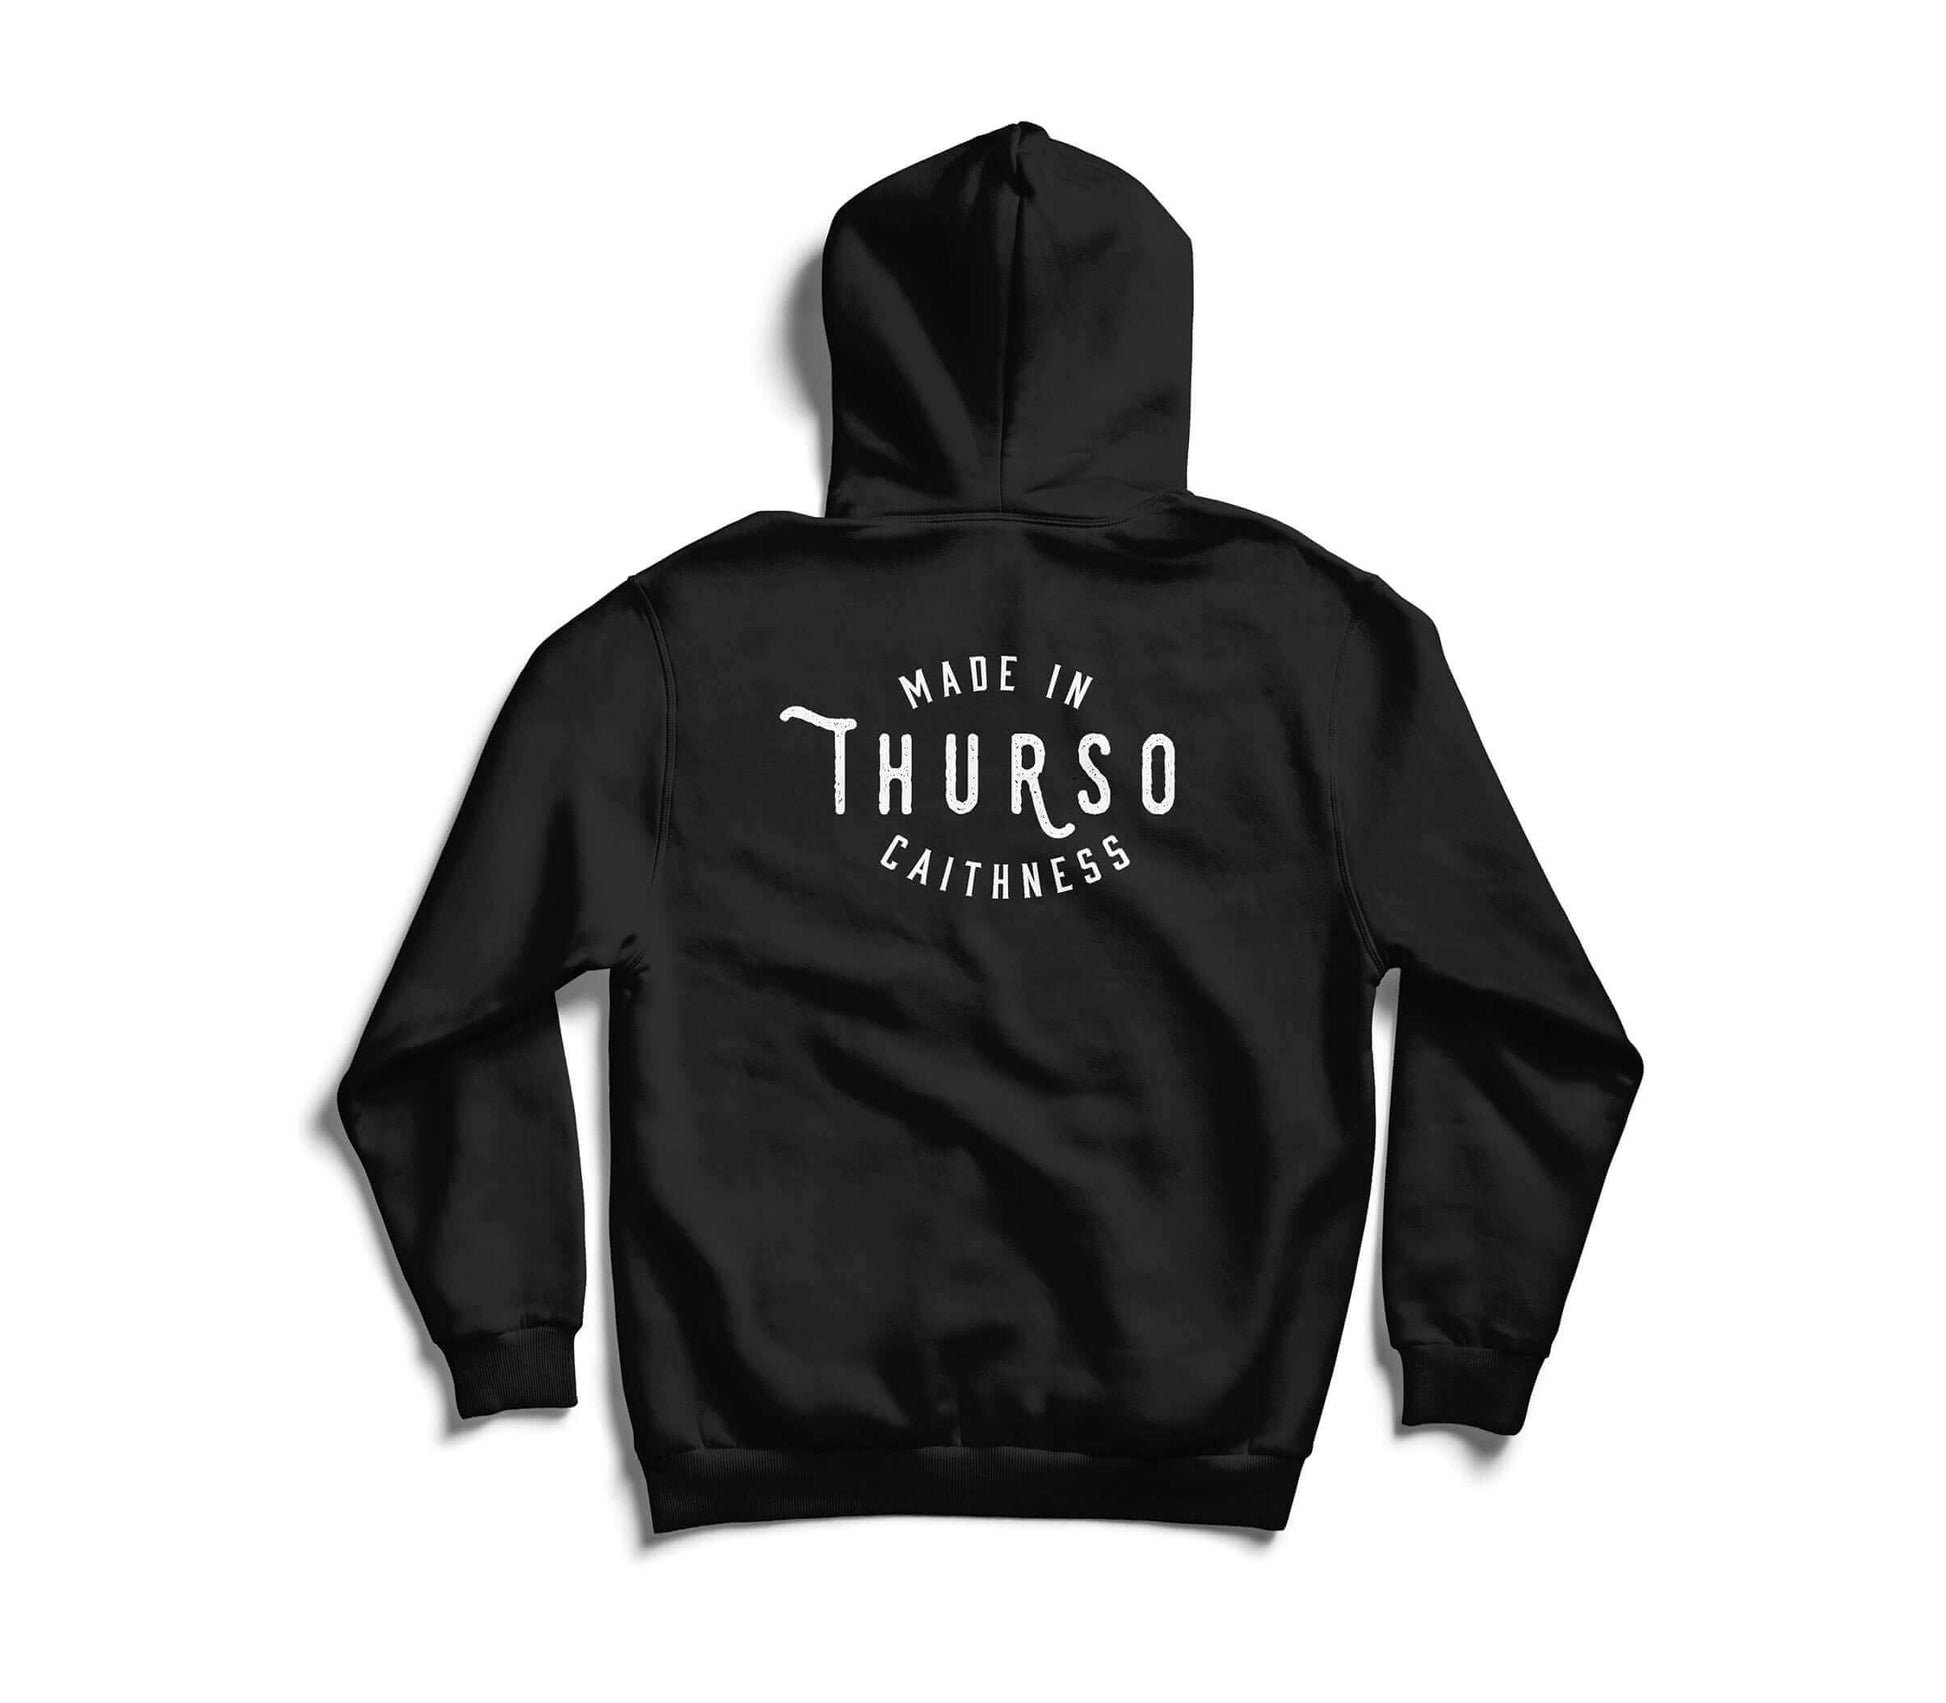 Wolfburn Hoodie ‘Made in Thurso’ Black Hooded top. Screen printed 'Wolfburn' logo on the chest and large Made in Thurso on the back.